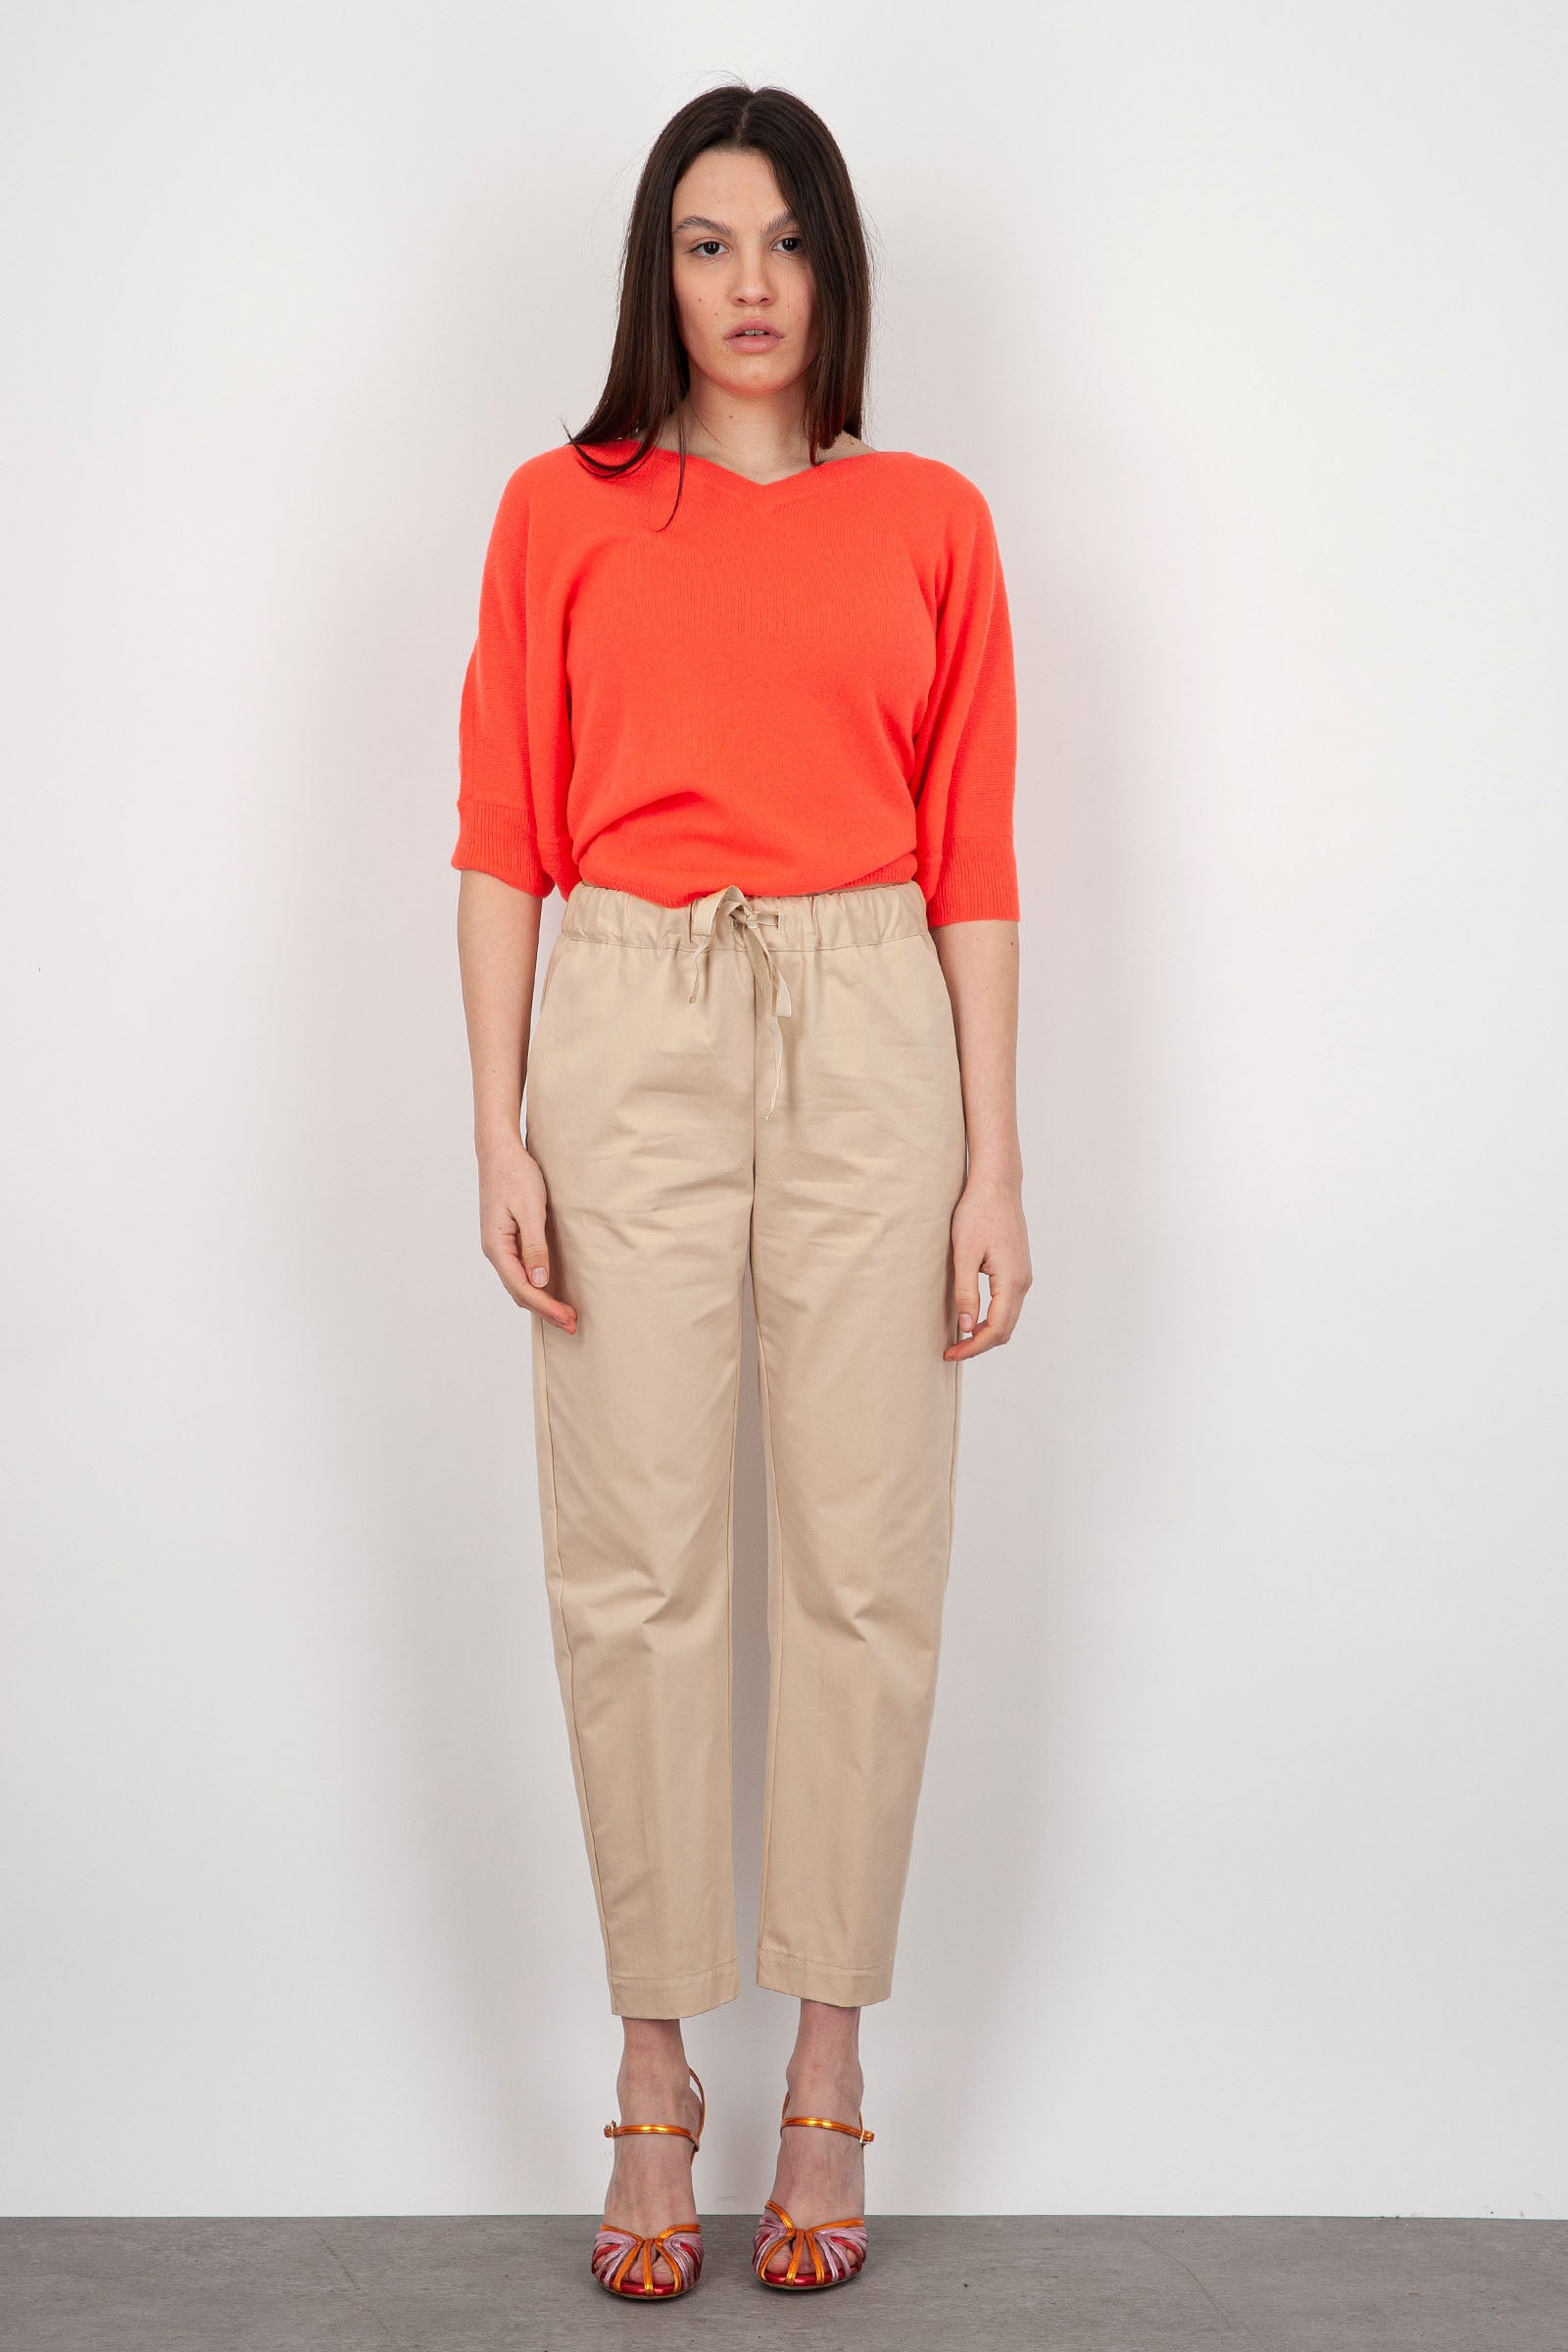 Semicouture Buddy Trousers Camel Cotton - 5